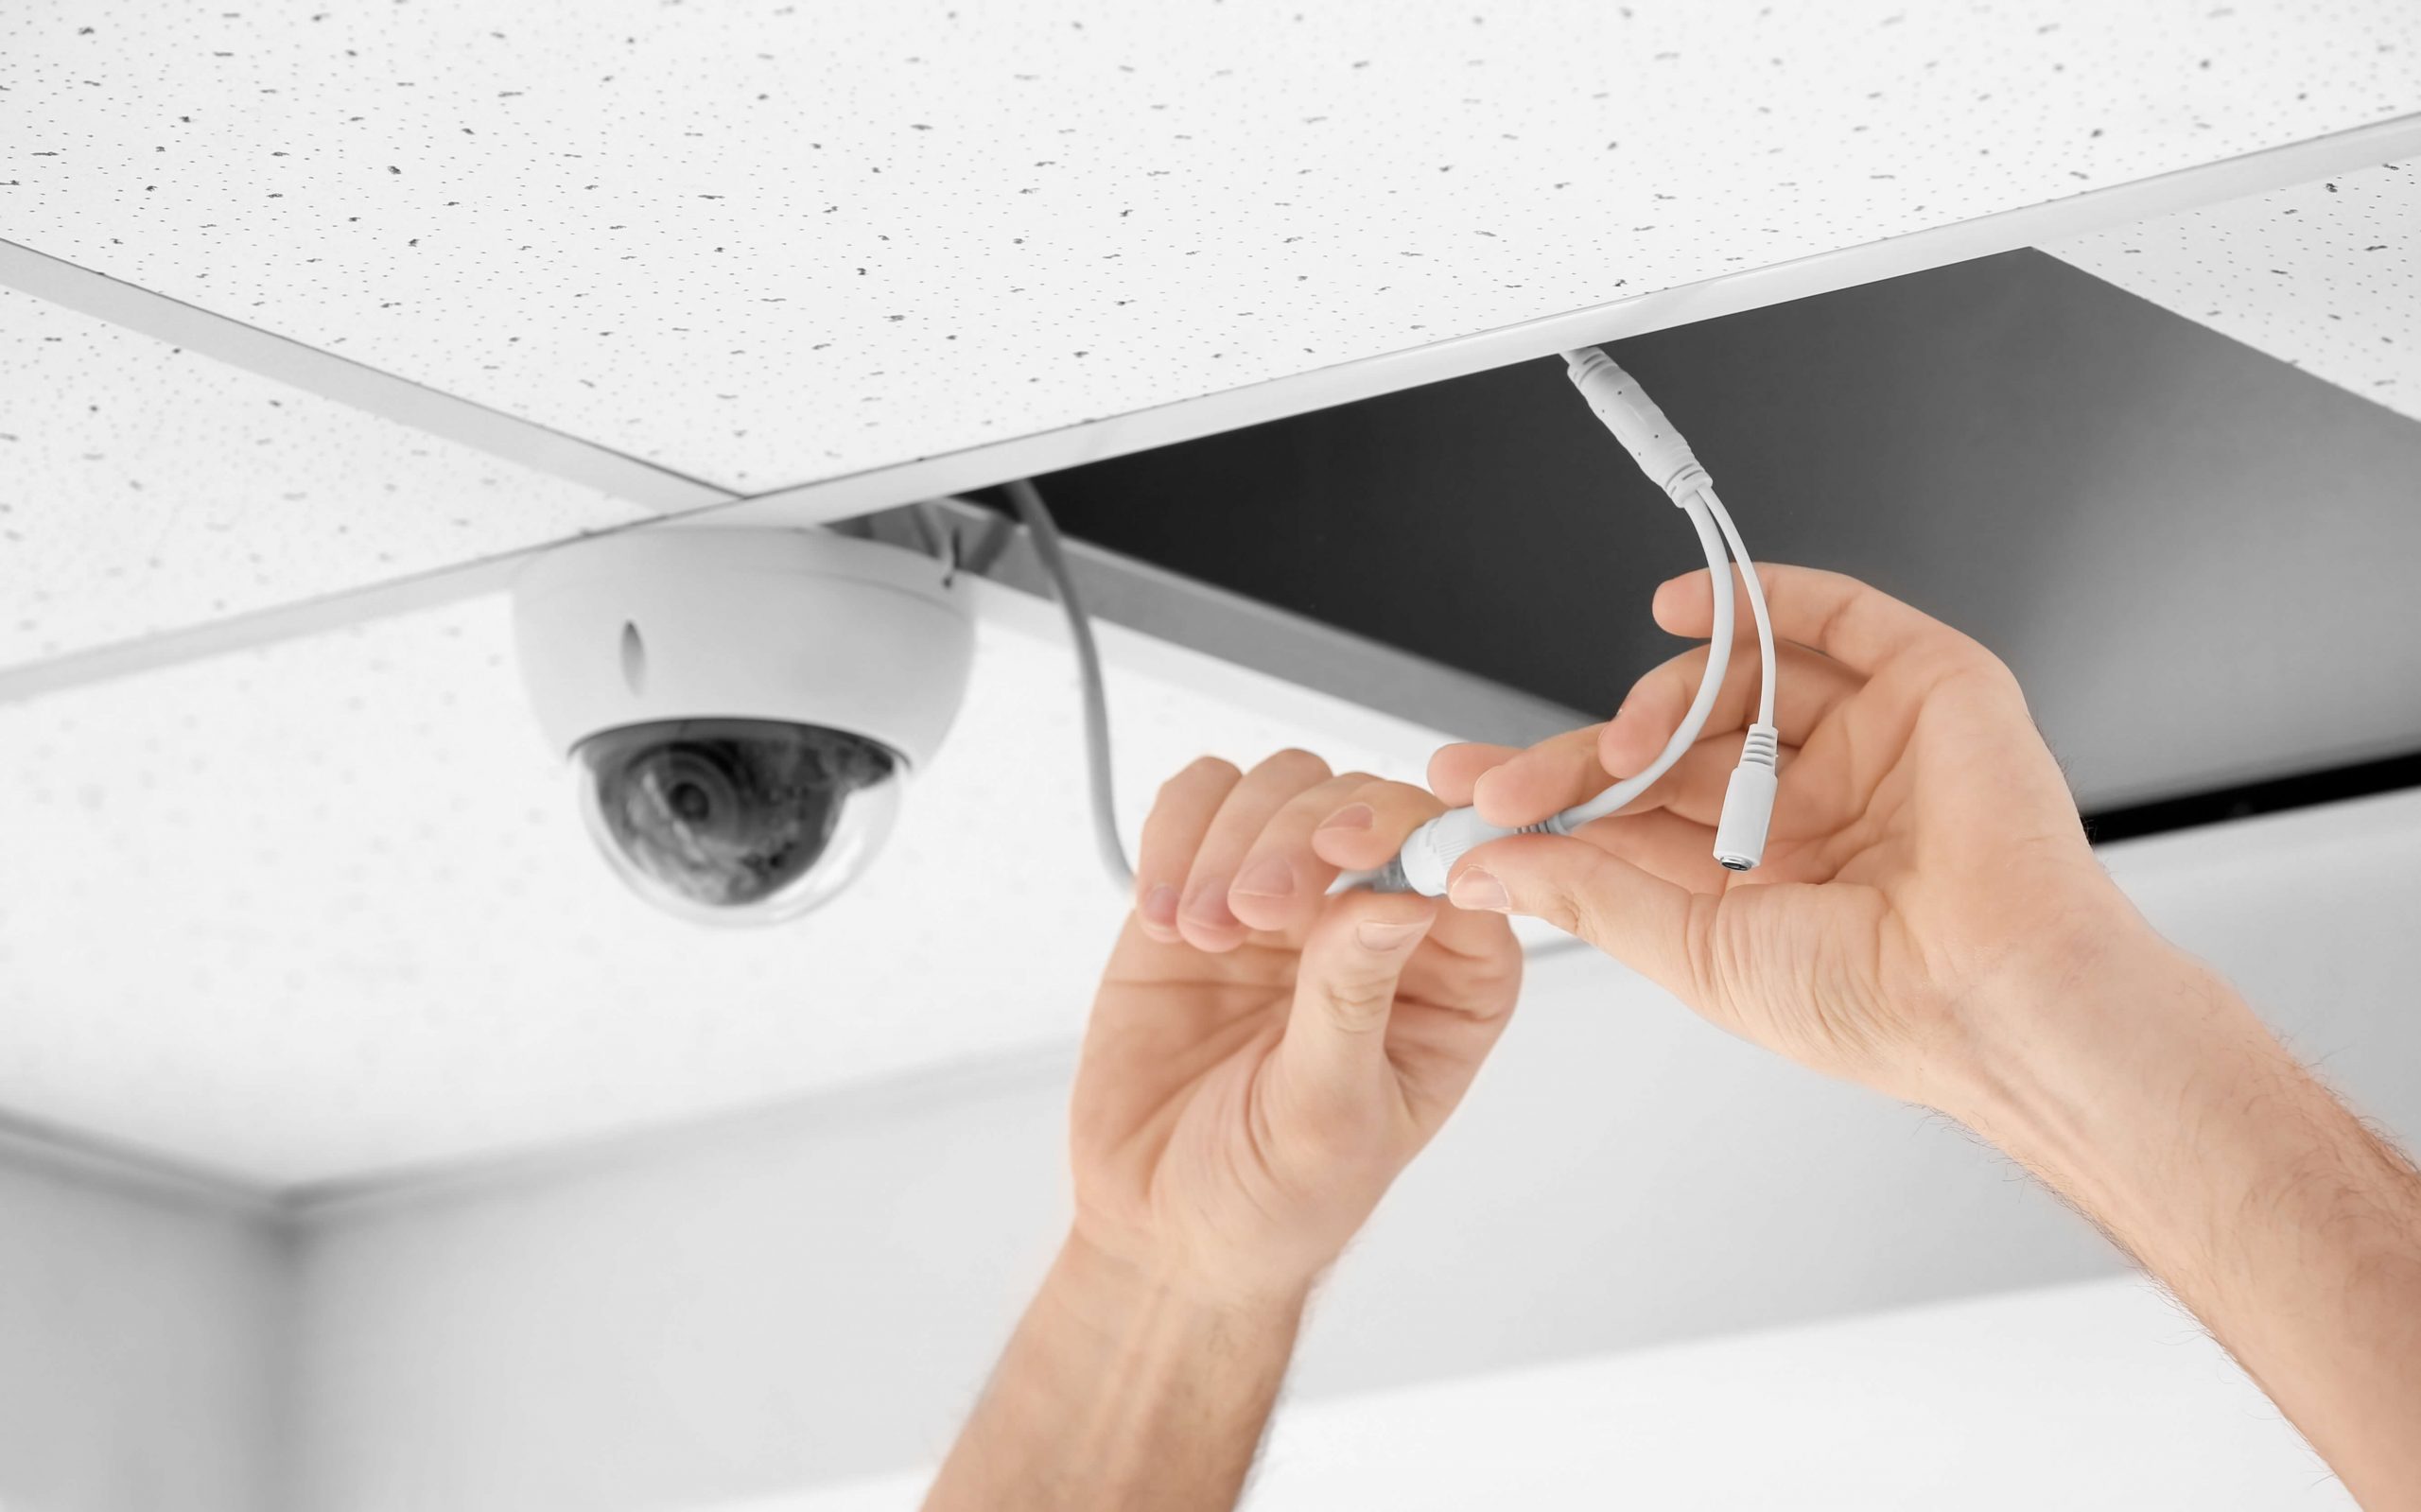 Where To Mount Outdoor Security Cameras?